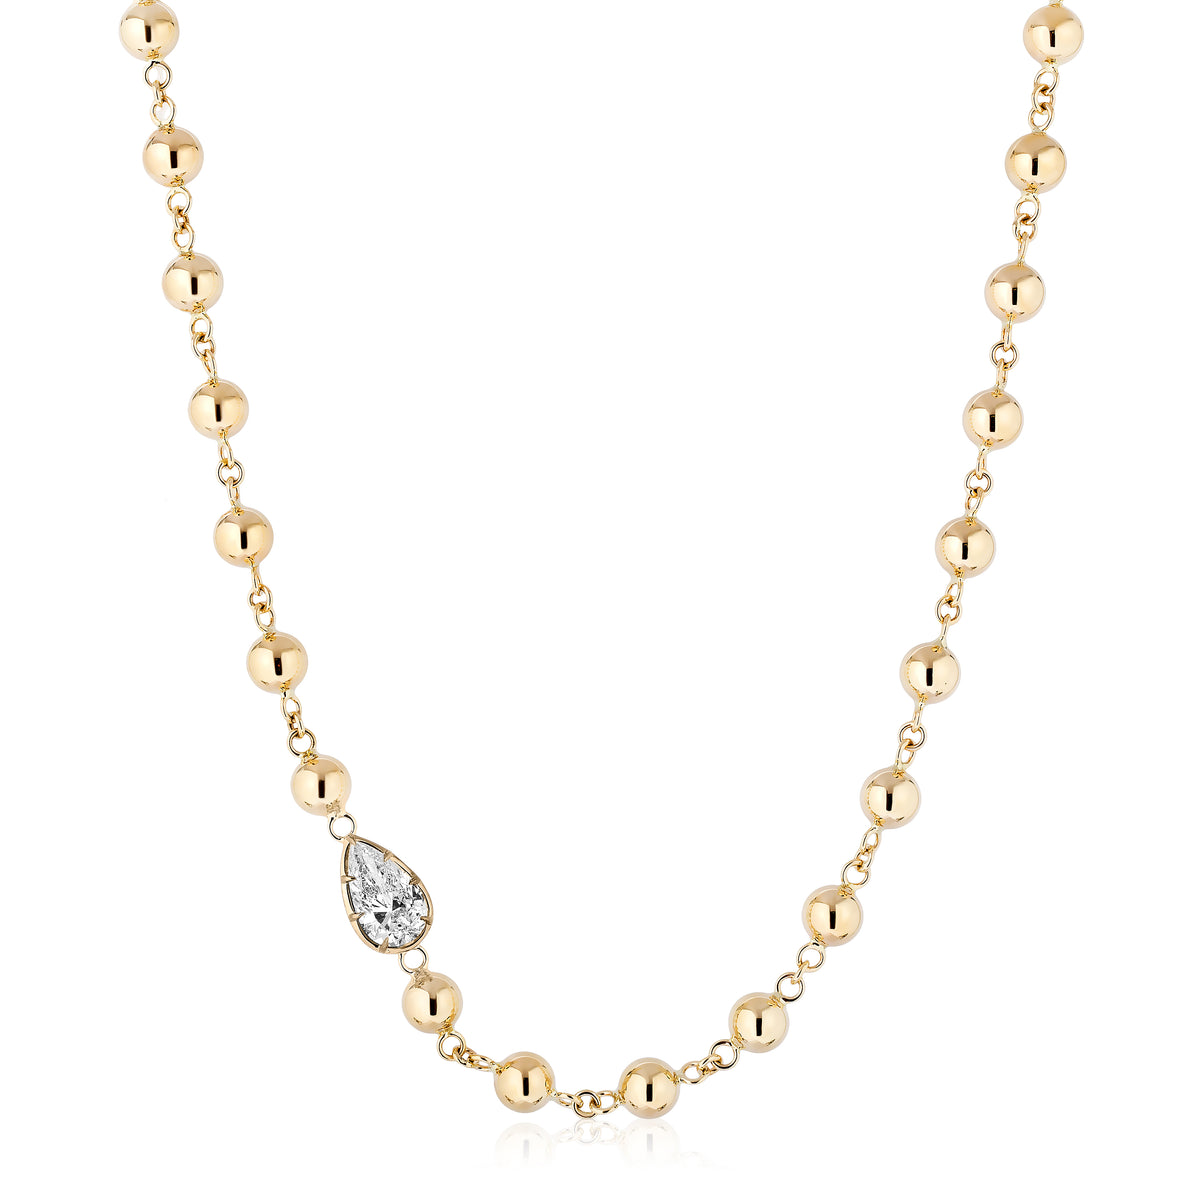 Garland Chain Necklace in Yellow Gold with East-West Set Pear Diamond